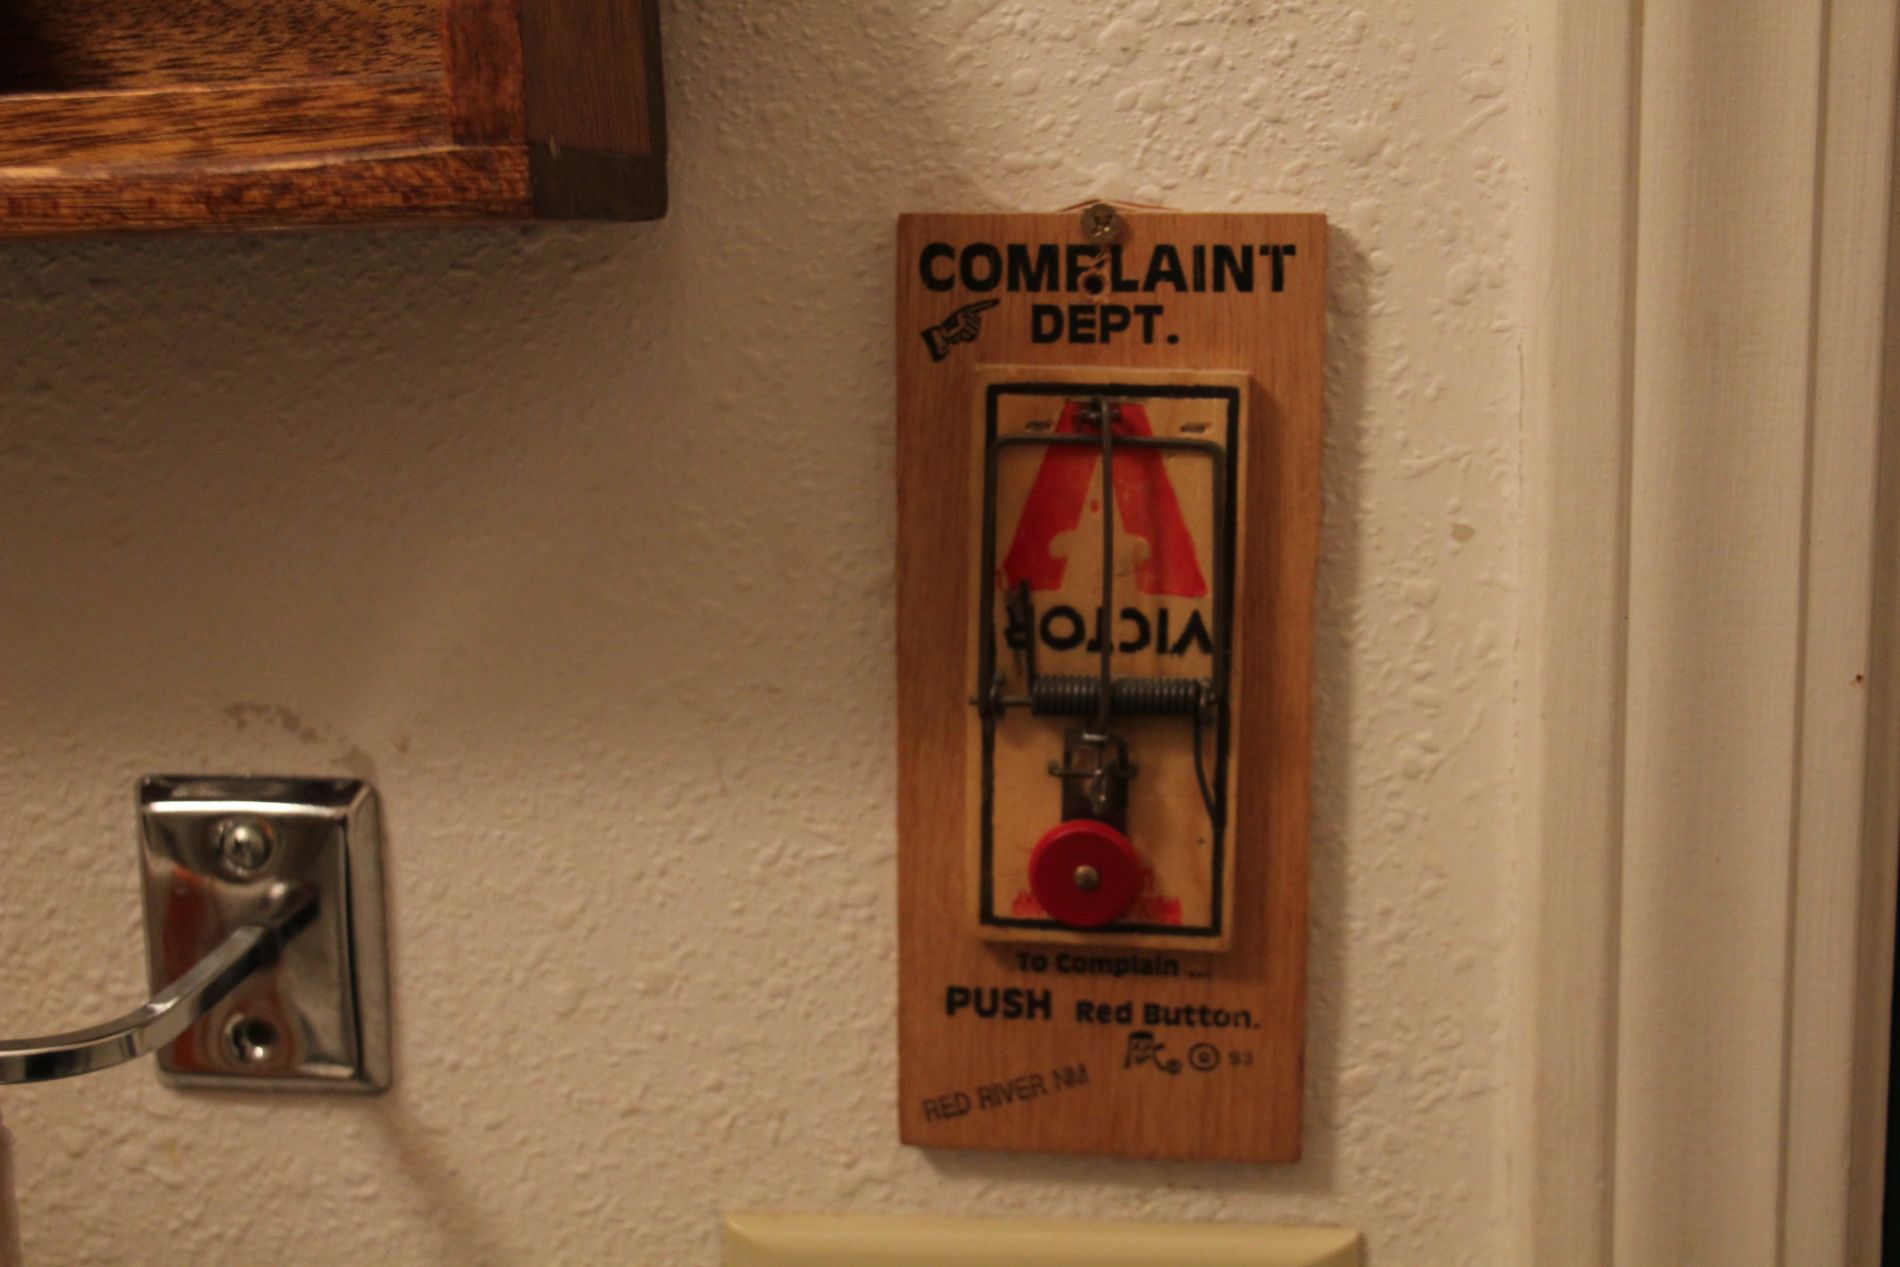 Mouse Trap complaint button in Darby, Montana